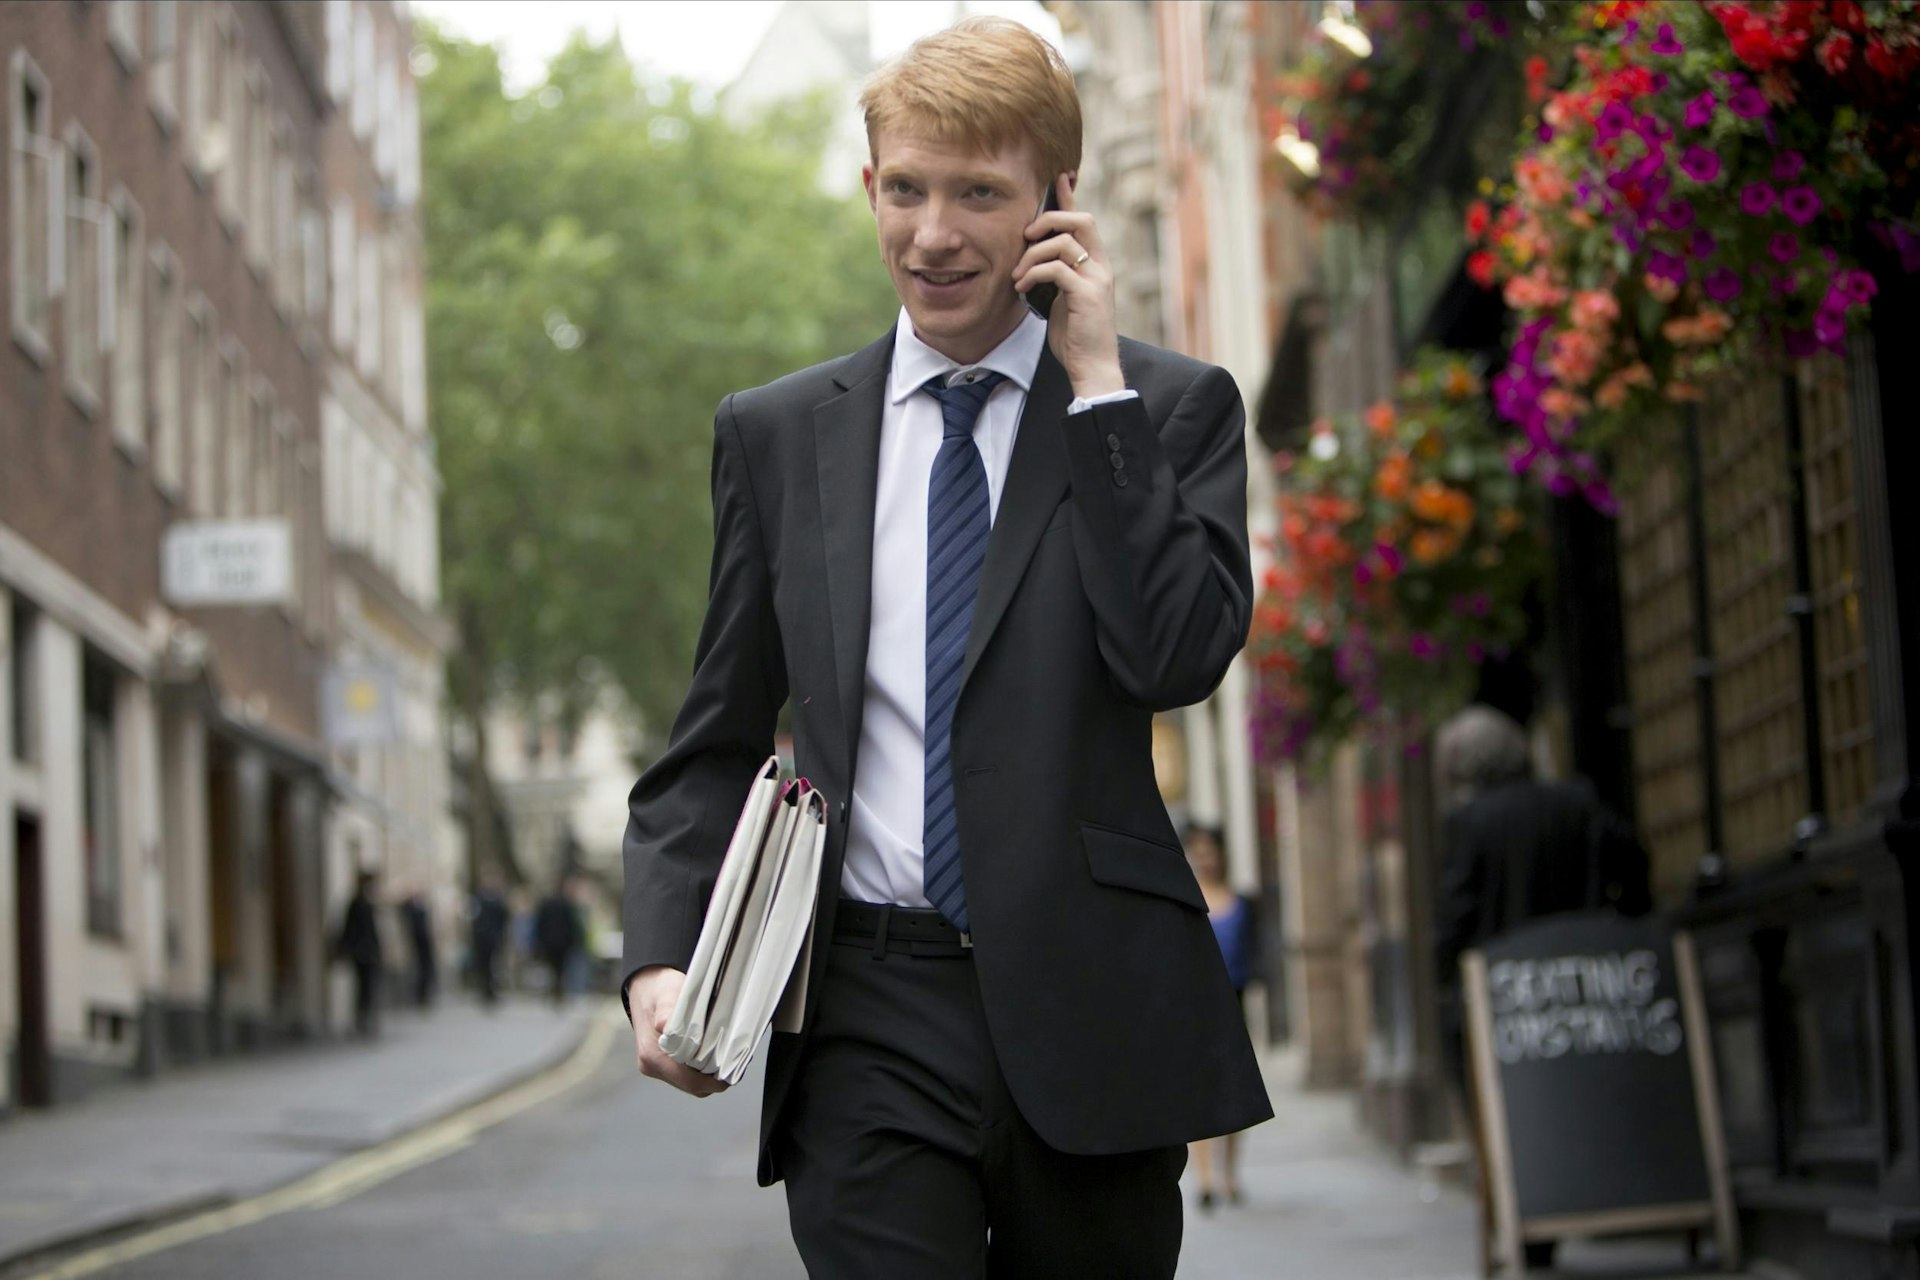 Domhnall Gleeson in About Time, walking down a cobblestone street wearing a suit with a phone in his hand. A pub with flowers is seen out of focus in the background.